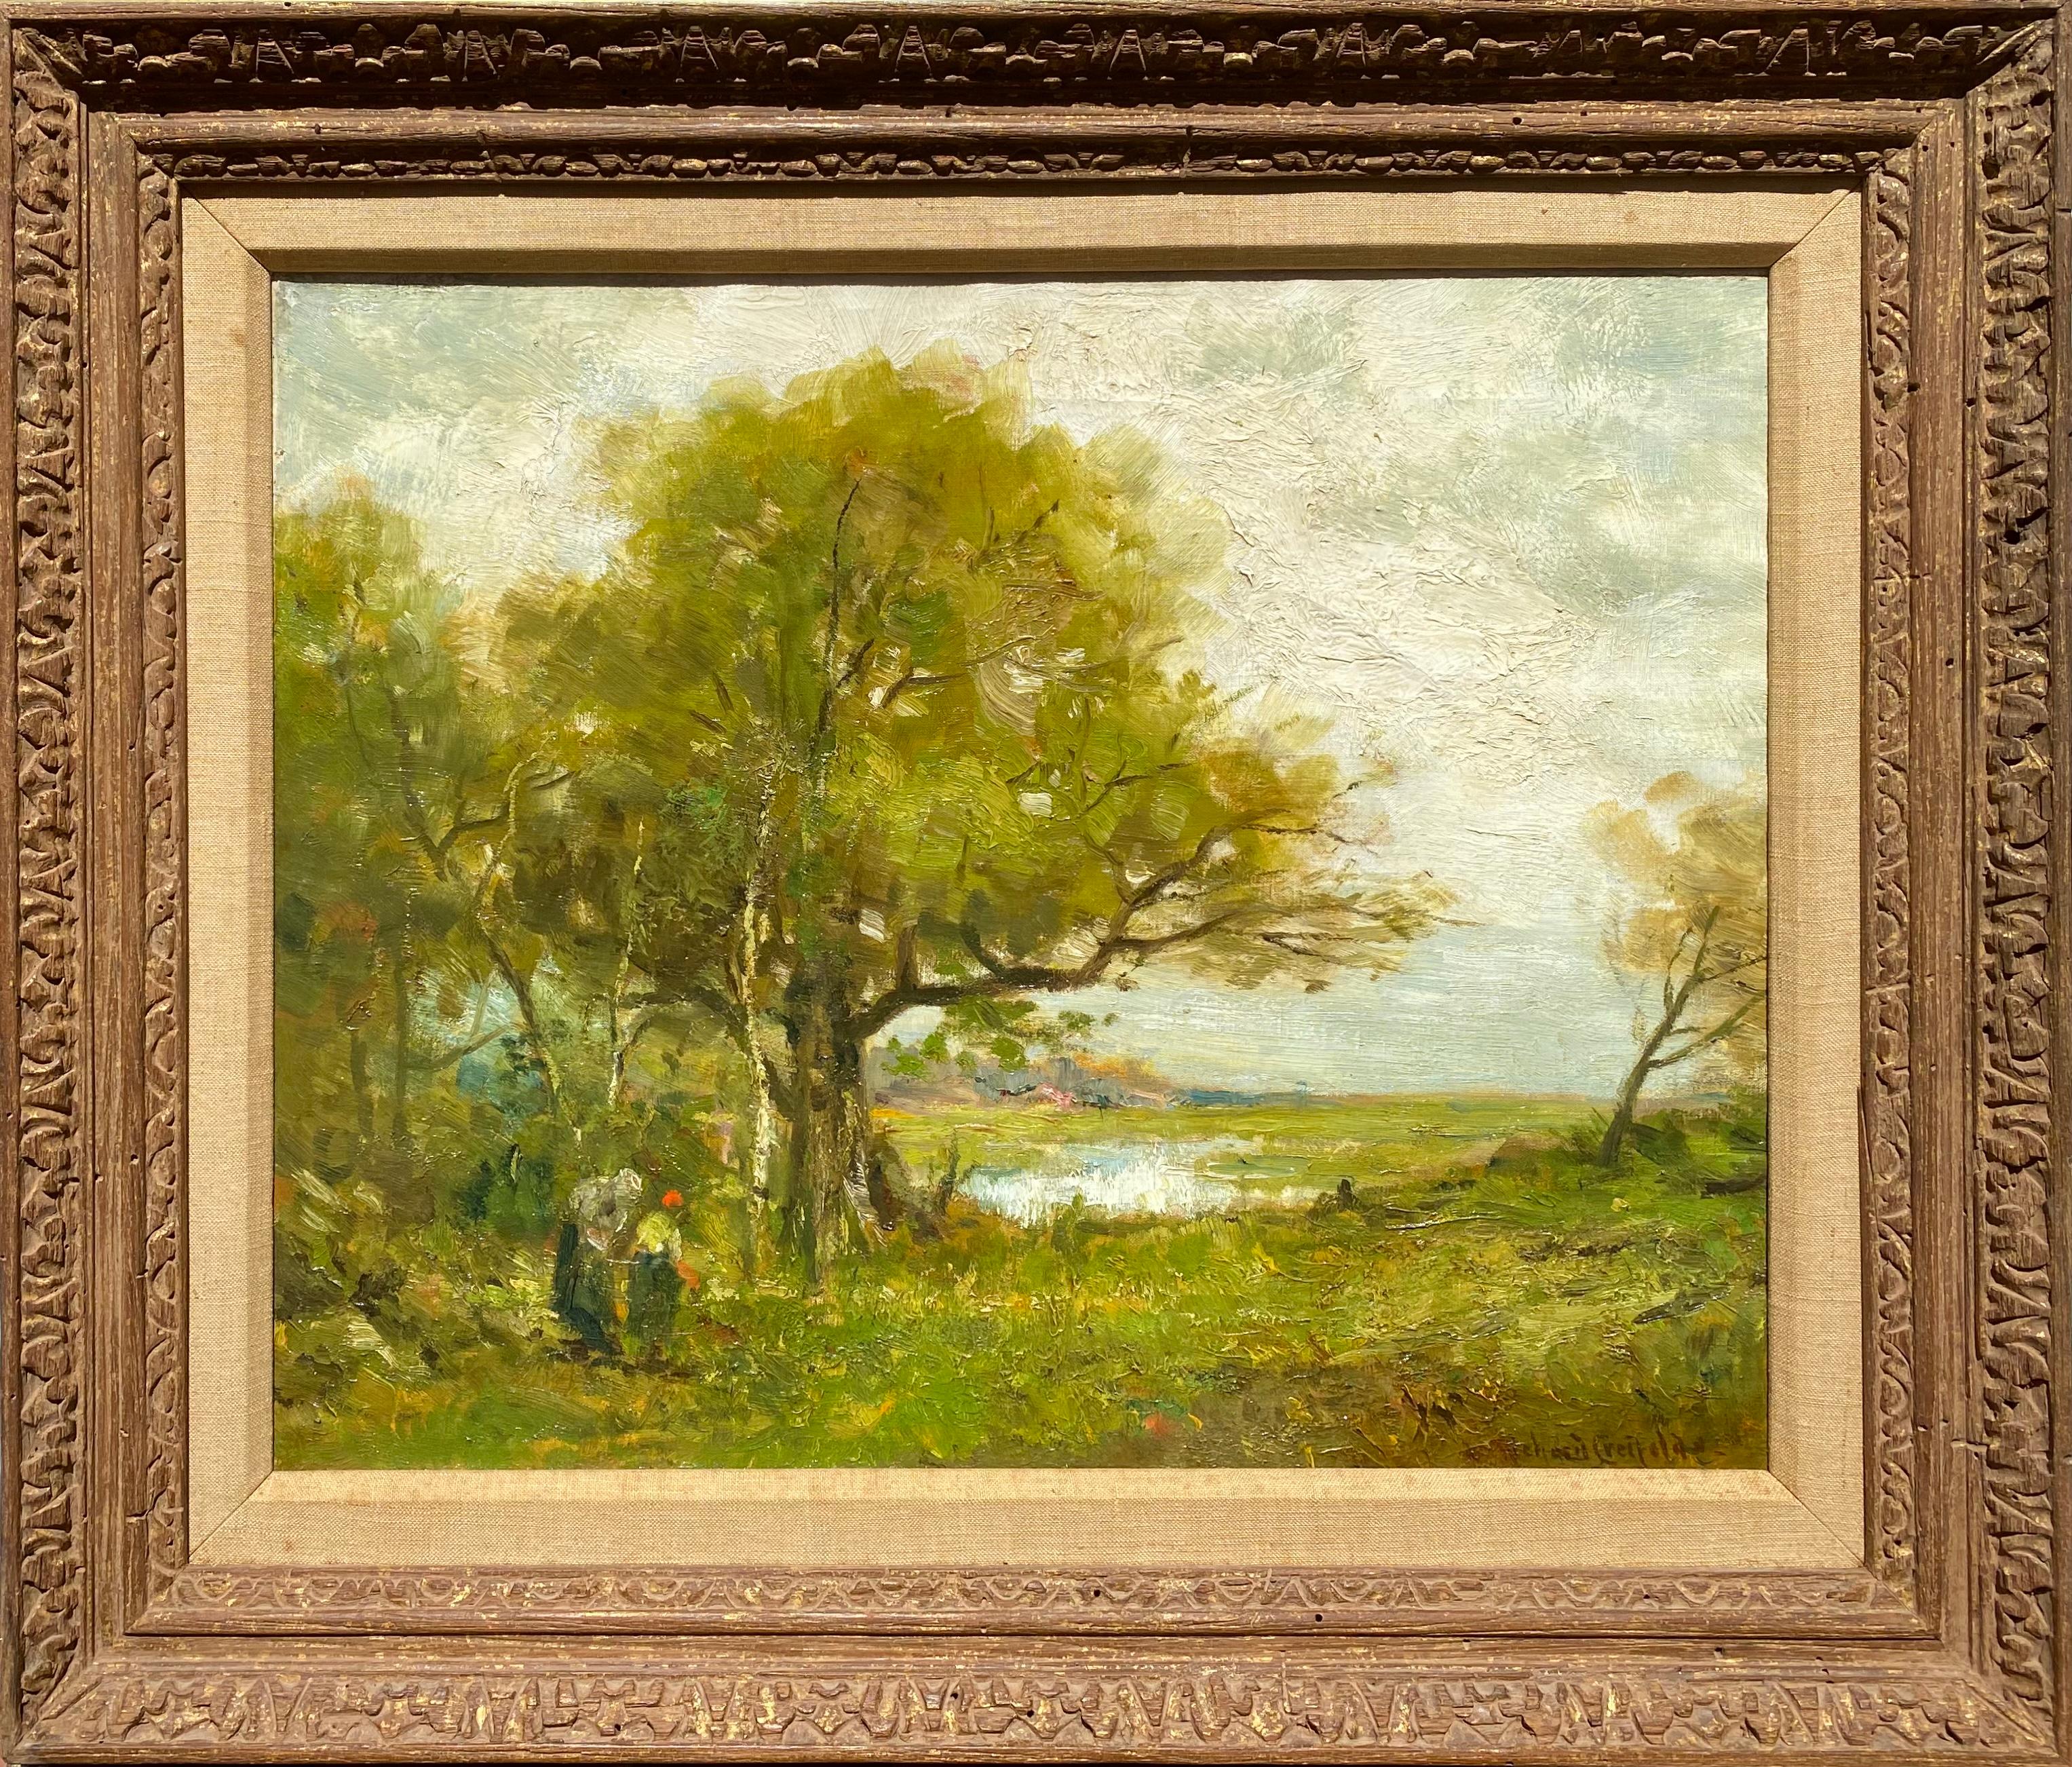 “Figures by the Pond” - Painting by Richard Creifelds